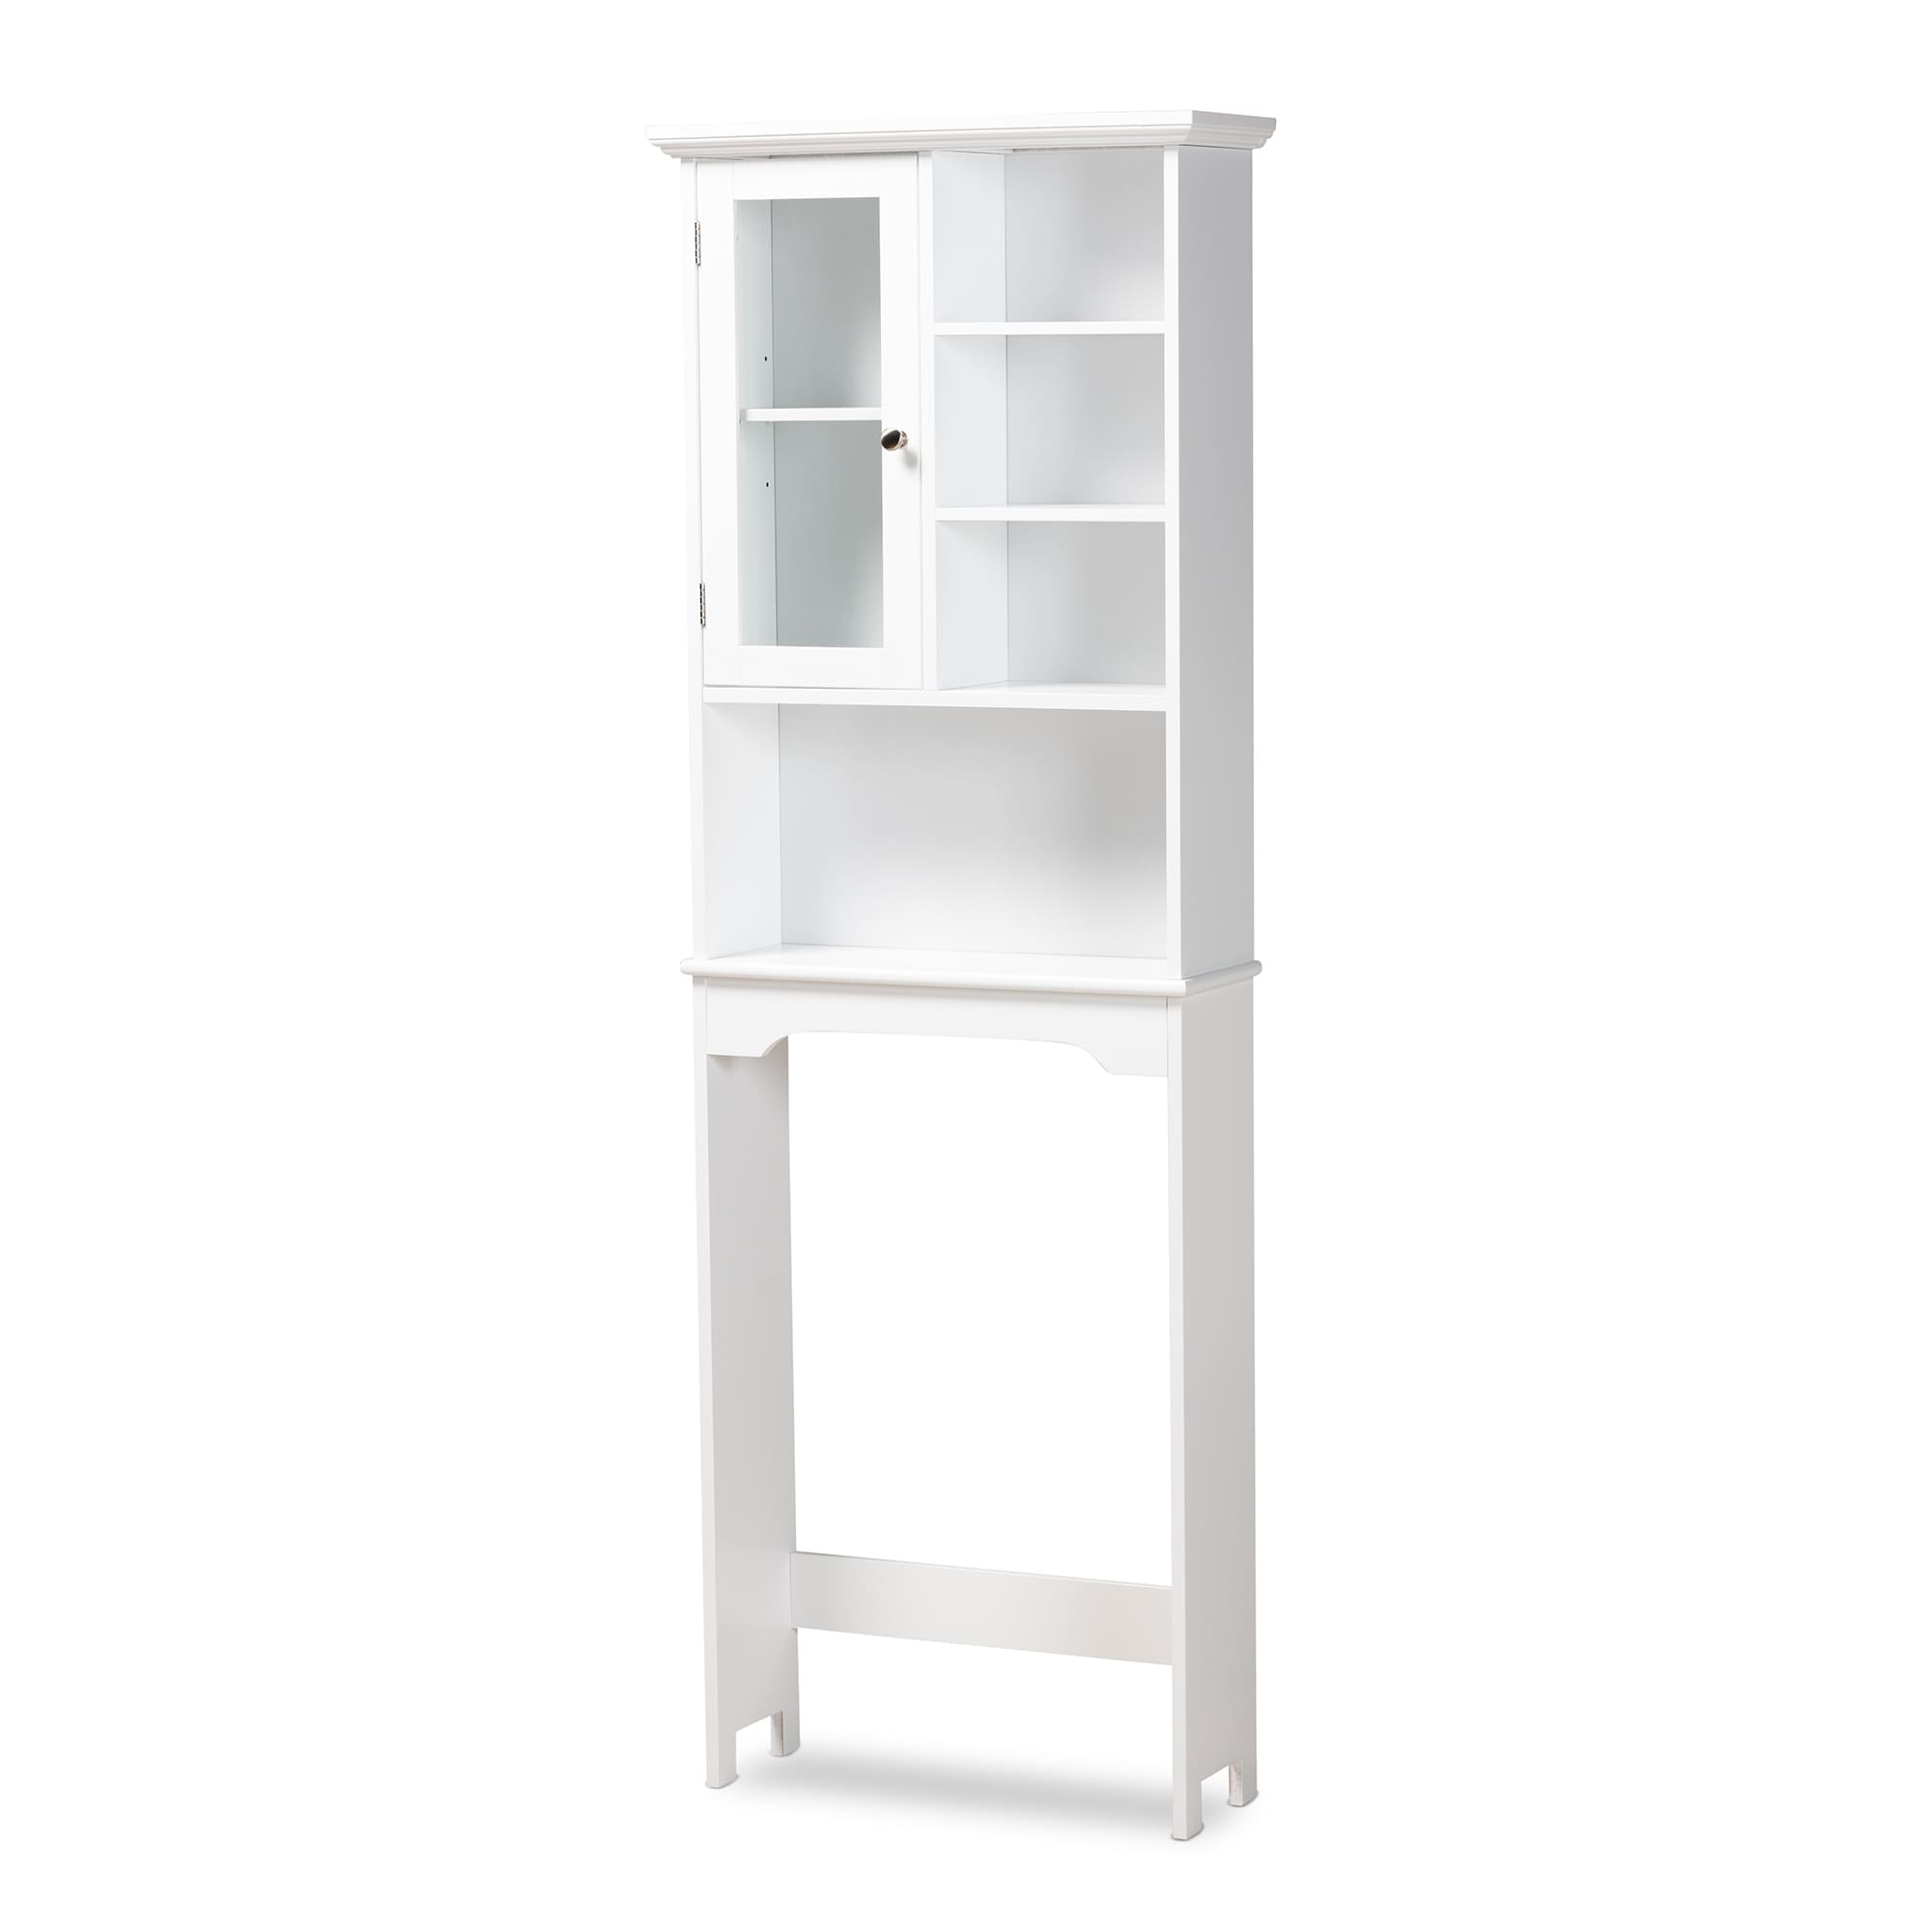 https://ak1.ostkcdn.com/images/products/is/images/direct/1ec14671eb354a185fce800e16461109da5d0cda/Campbell-White-Finished-Wood-Over-the-Toilet-Bathroom-Storage-Cabinet.jpg